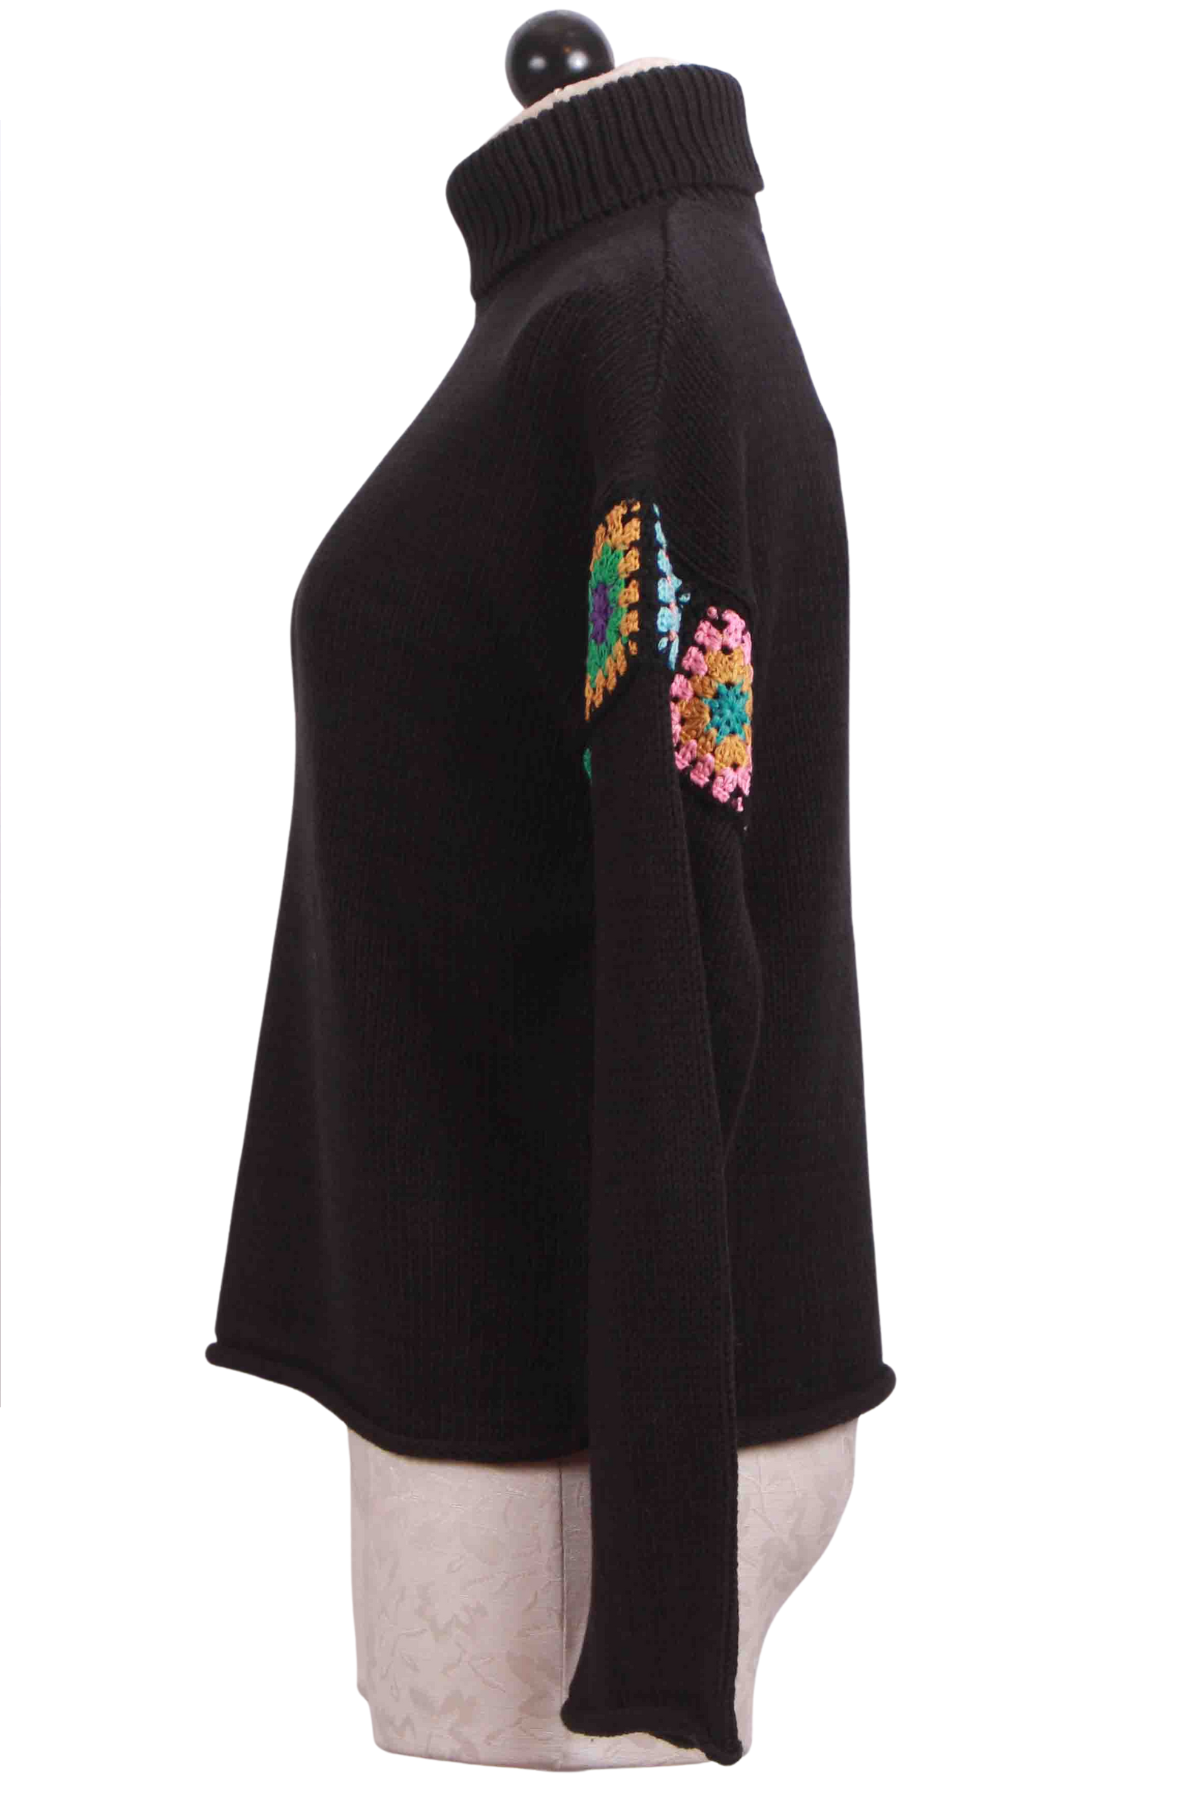 Side view of Black In The Loop Sweater by Lisa Todd with Drop Crocheted Trimmed Shoulder Sleeve